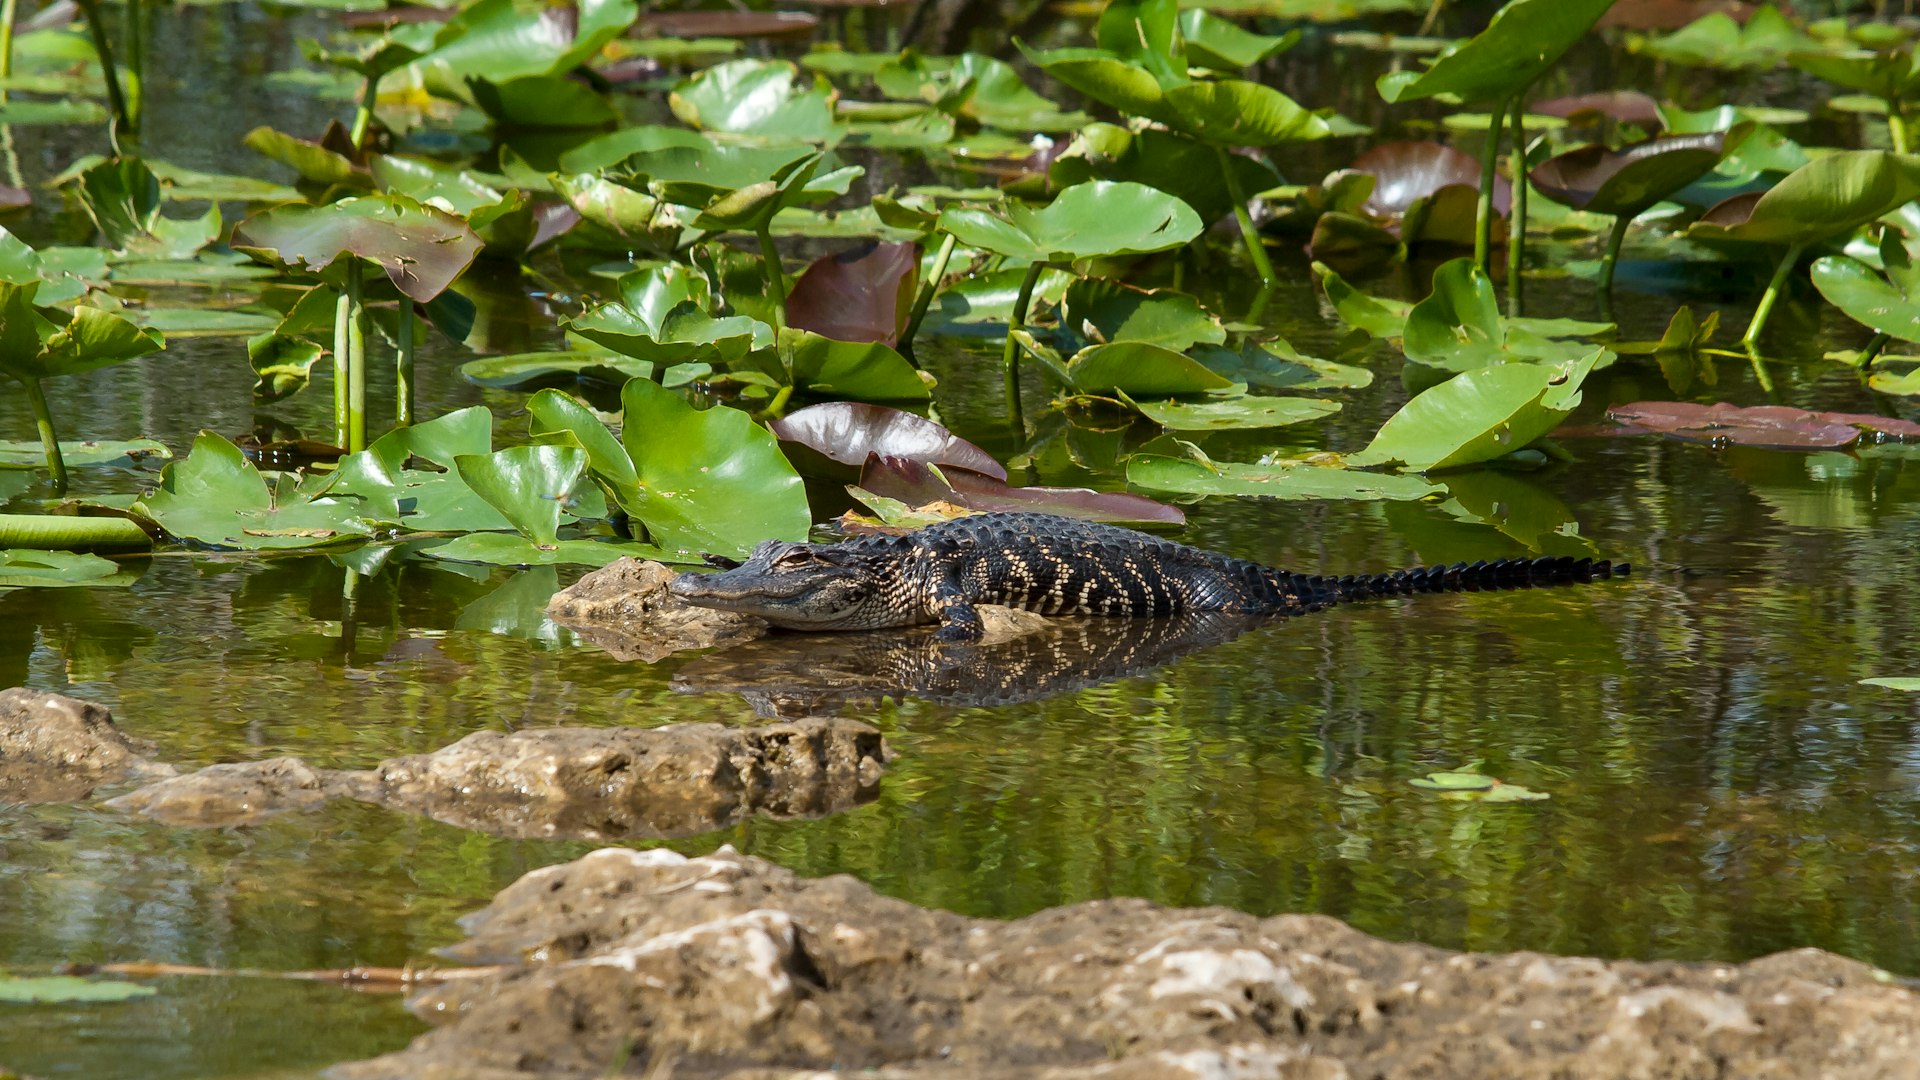 An American alligator on rocks in the water with green plants behind